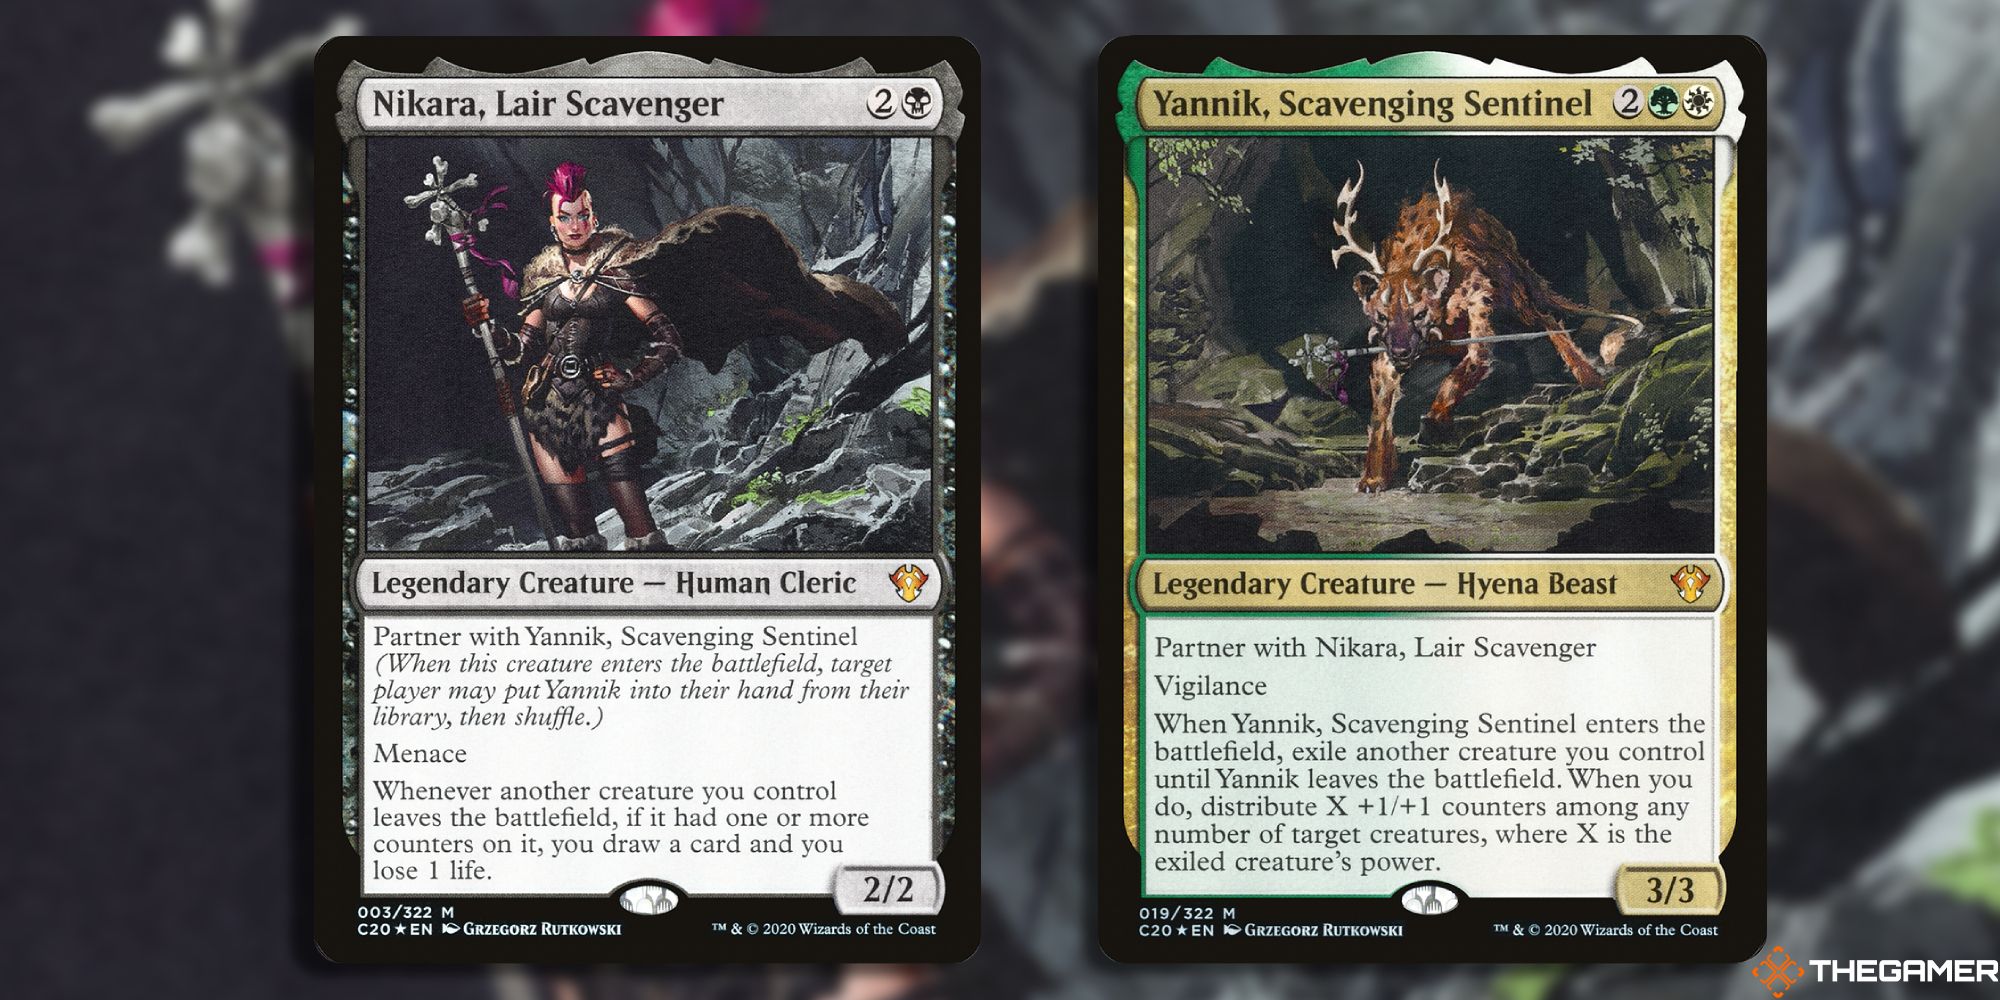 Image of the Nikara, Lair Scavenger and Yannik, Scavenging Sentinel cards in Magic: The Gathering, with art by Grzegorz Rutkowski